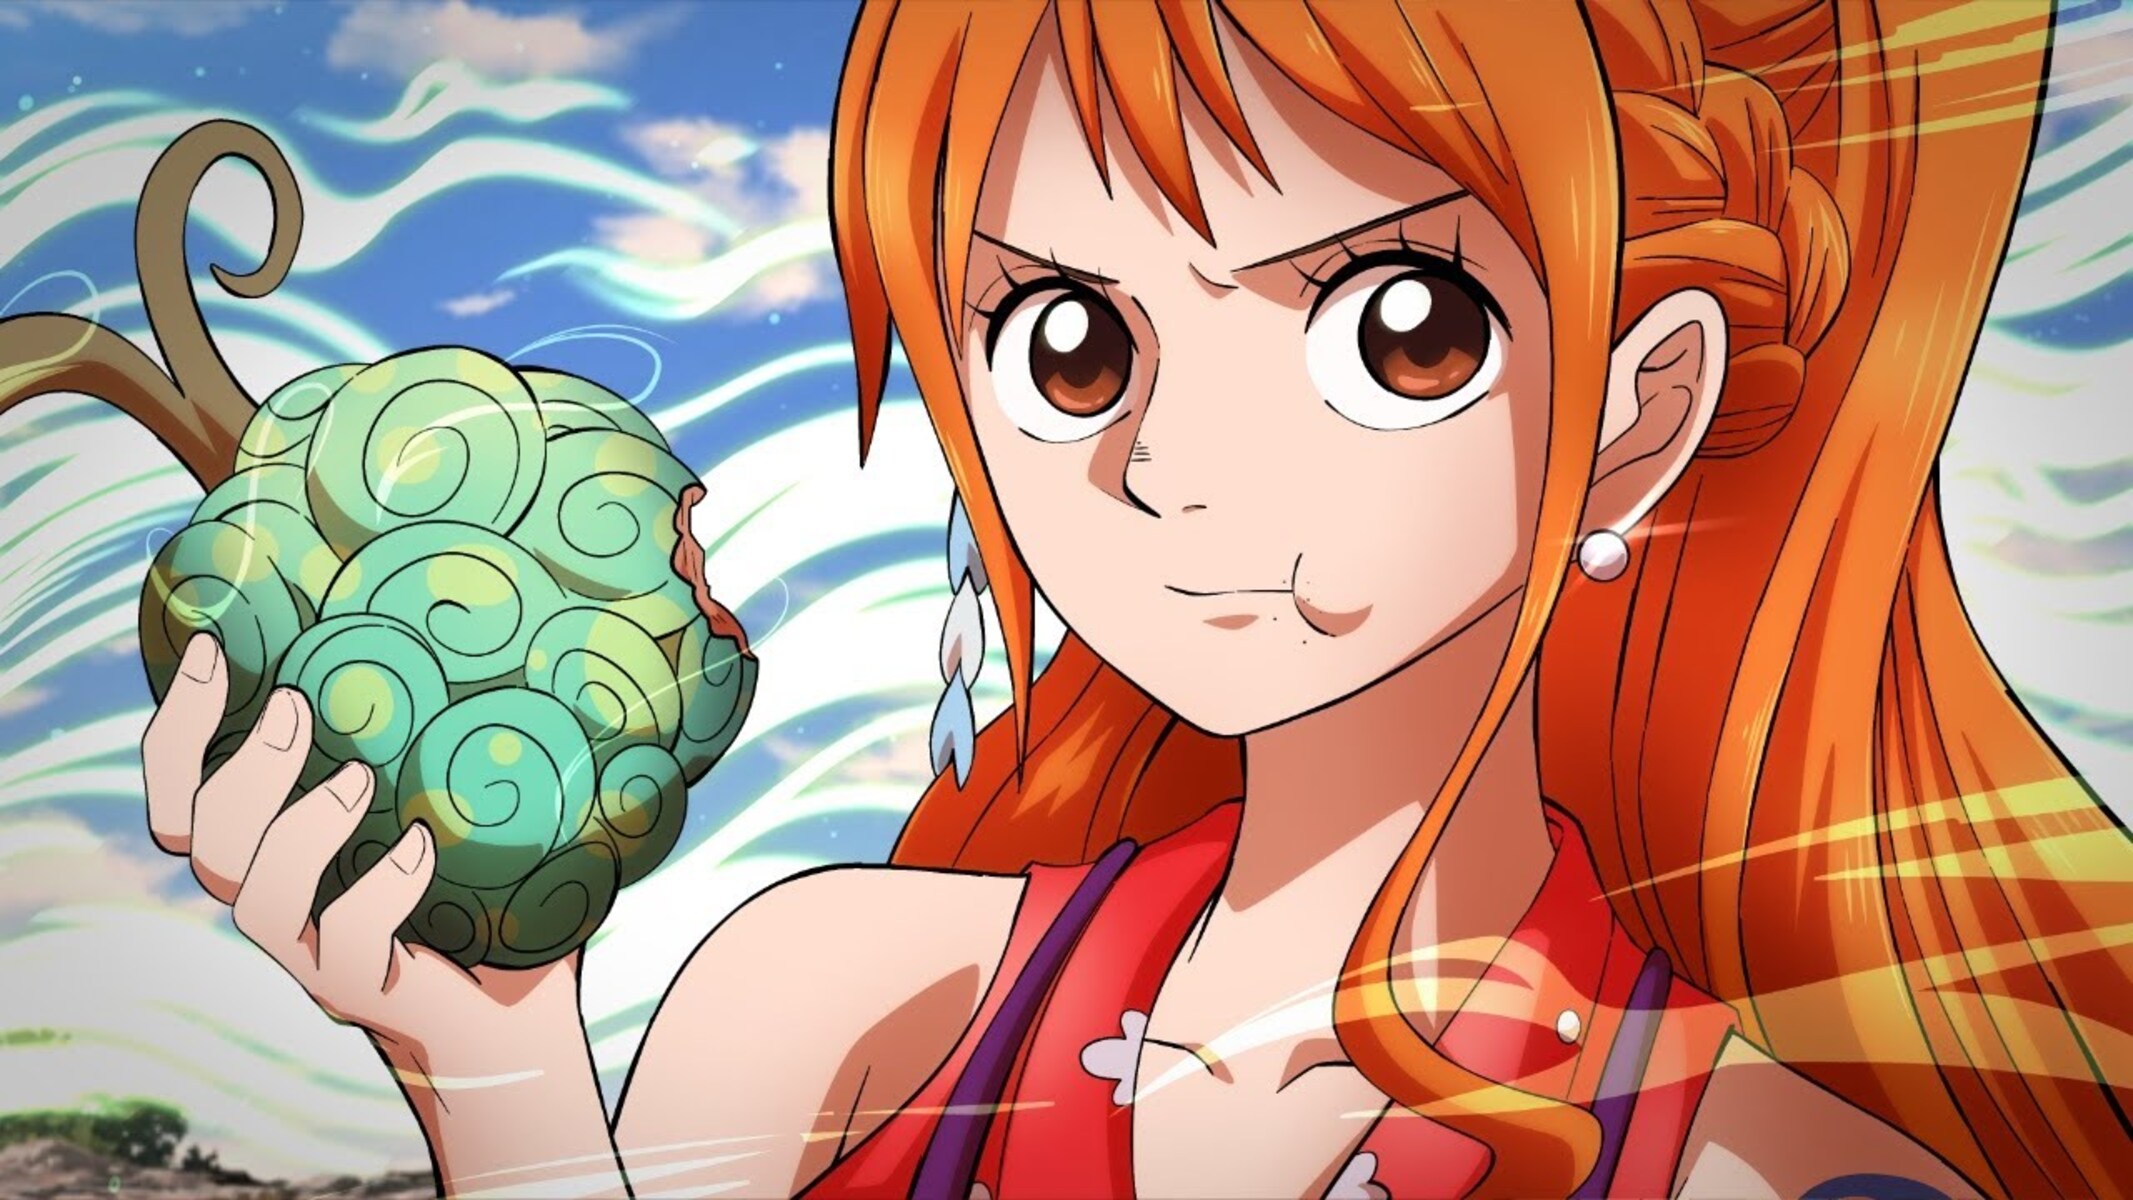 Nami with the Goro Goro no mi! (Enel's Rumble-Rumble fruit ; Based on the  new SBS) : r/OnePiece